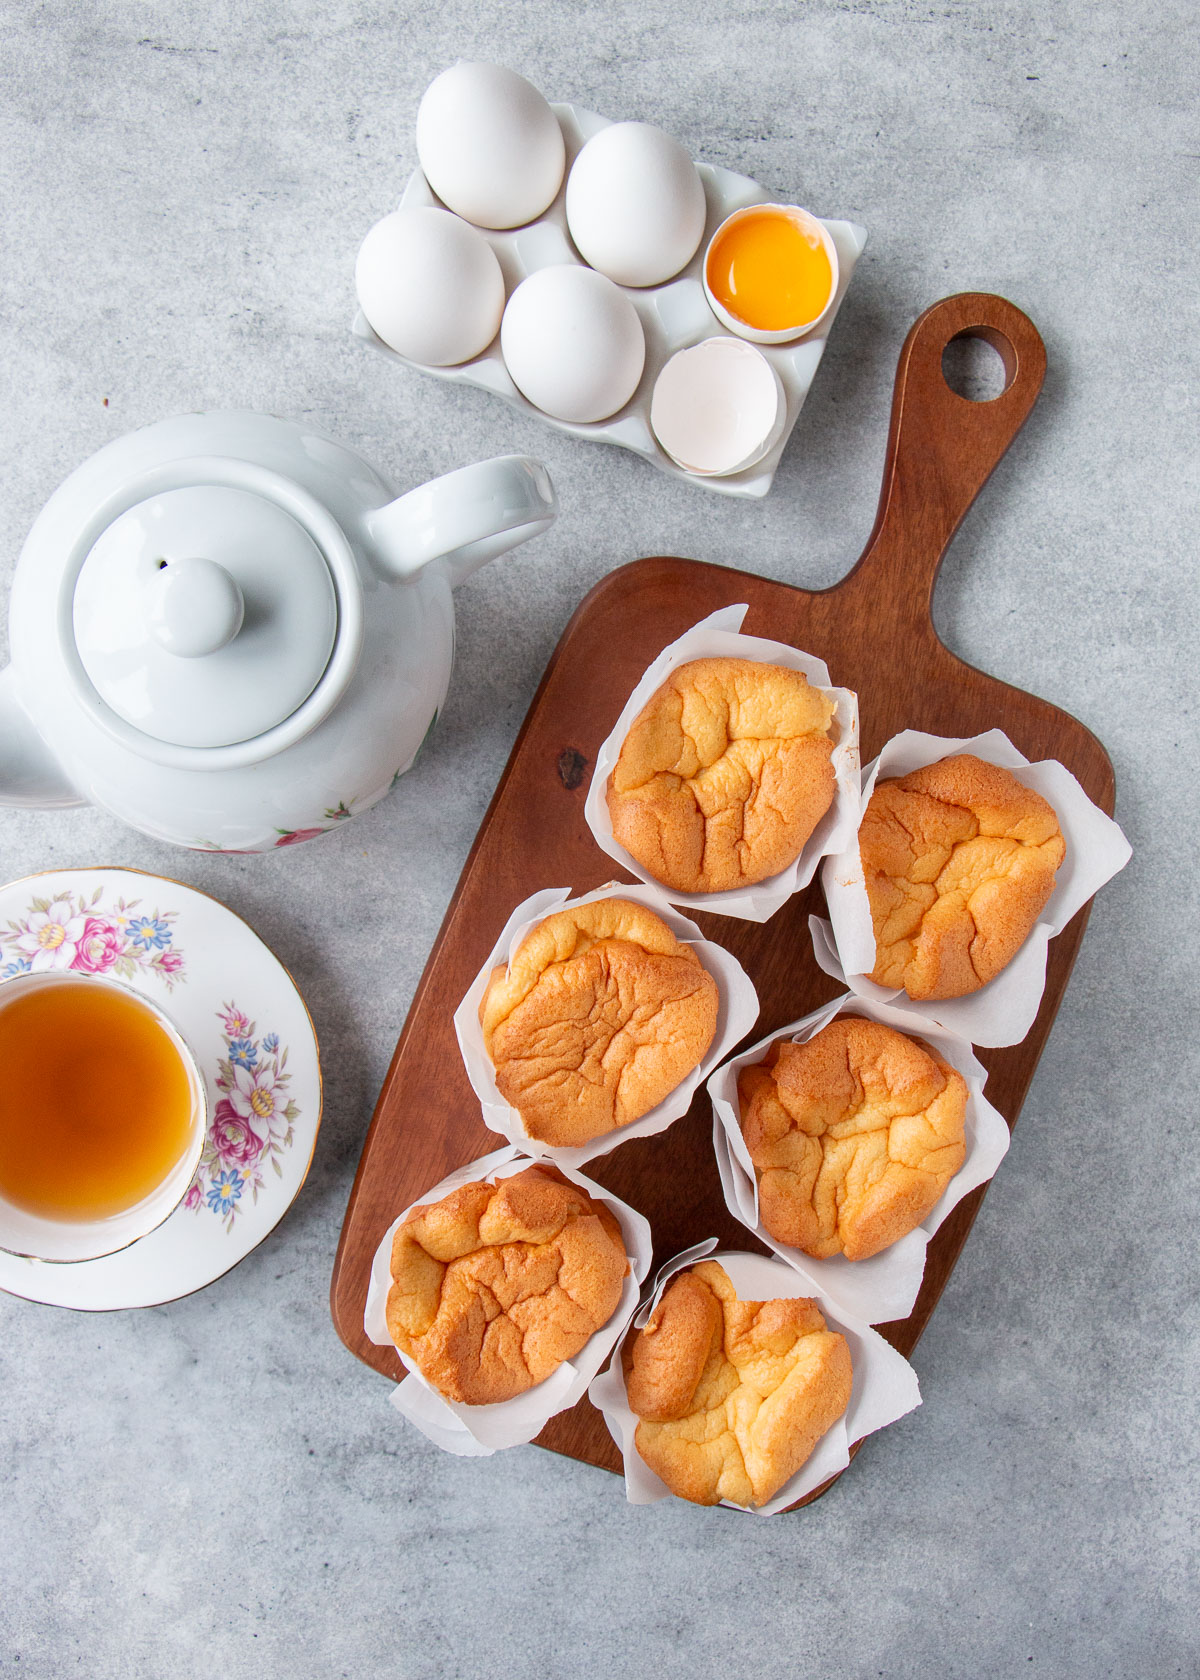 Overhead view of paper-wrapped sponge cakes on a wooden board with teapot and teacup.